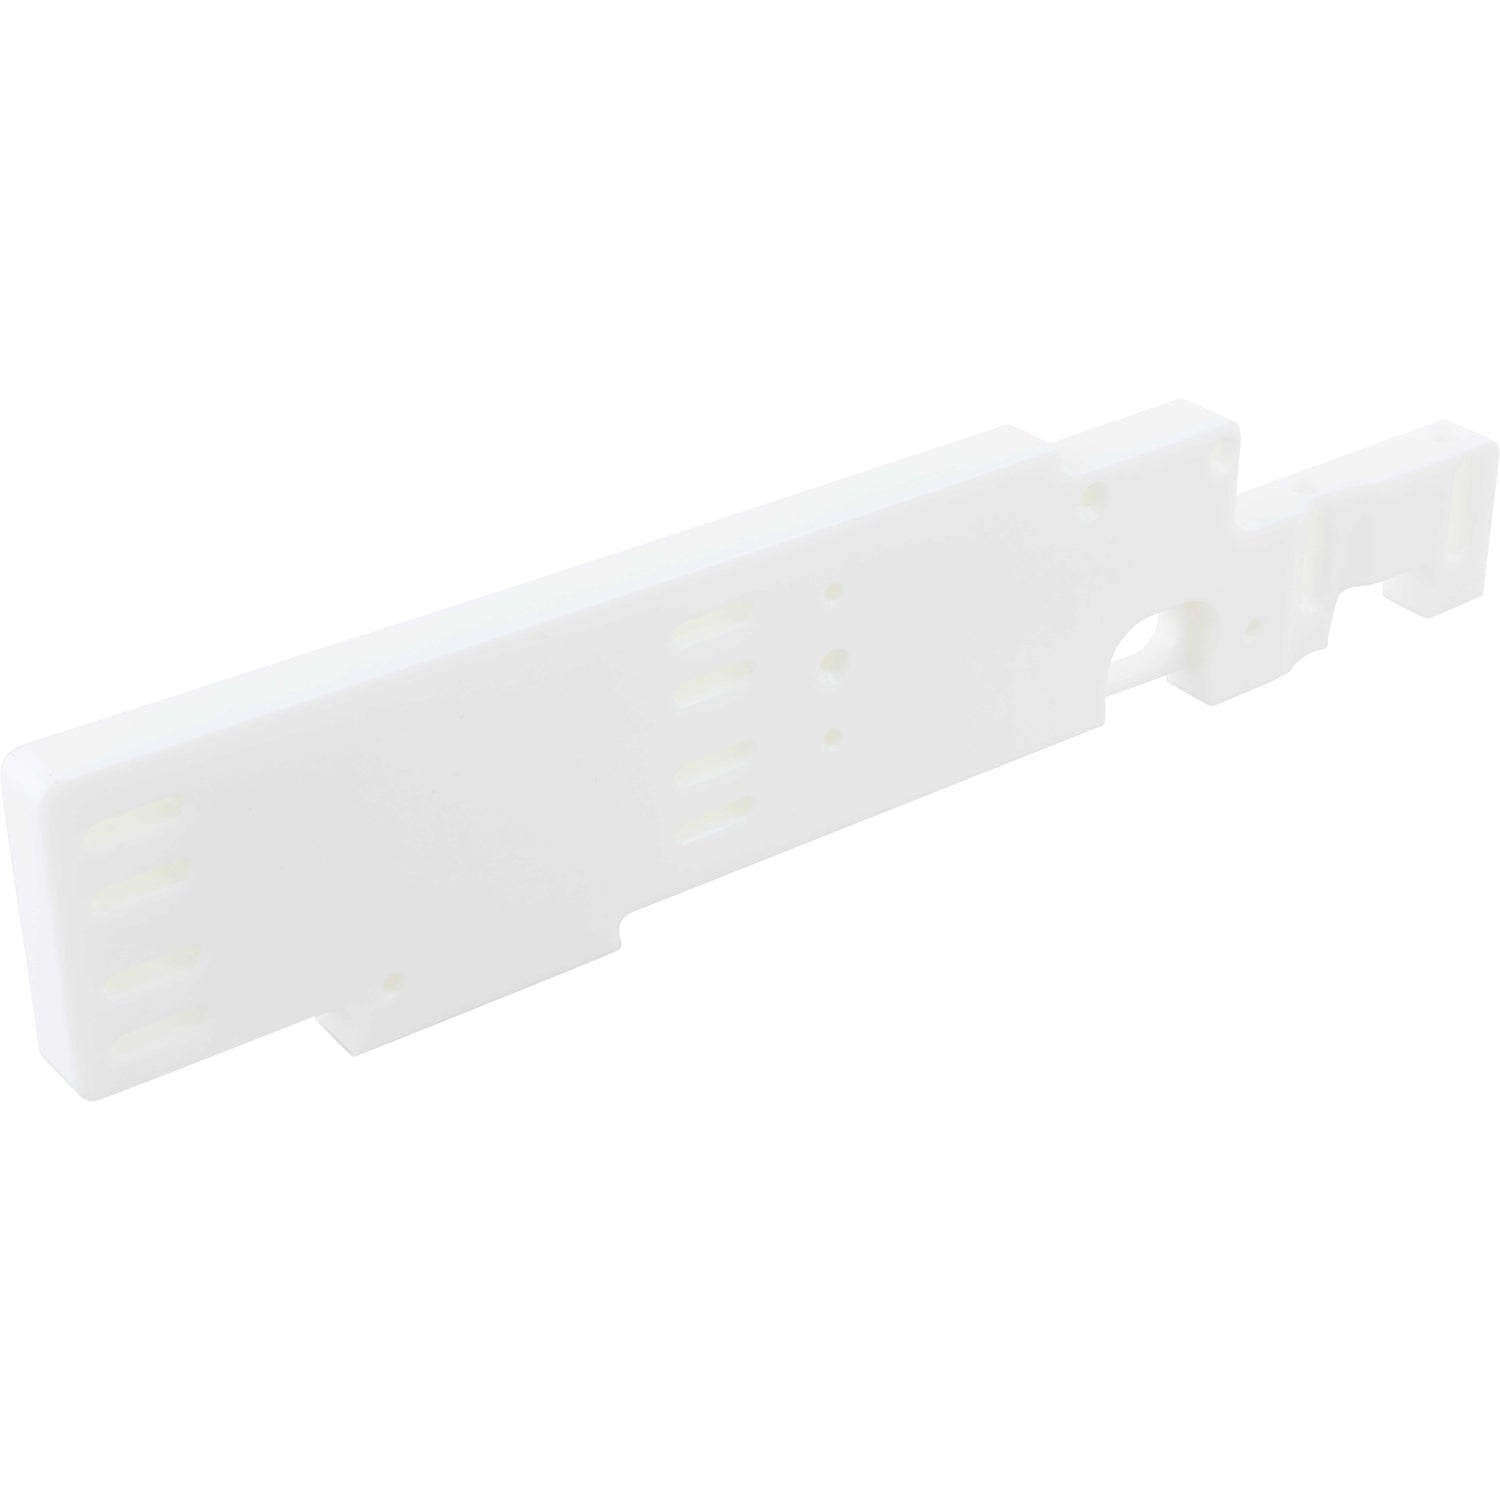 Rectangular, white machined plastic part with multiple mounting holes on white background. 